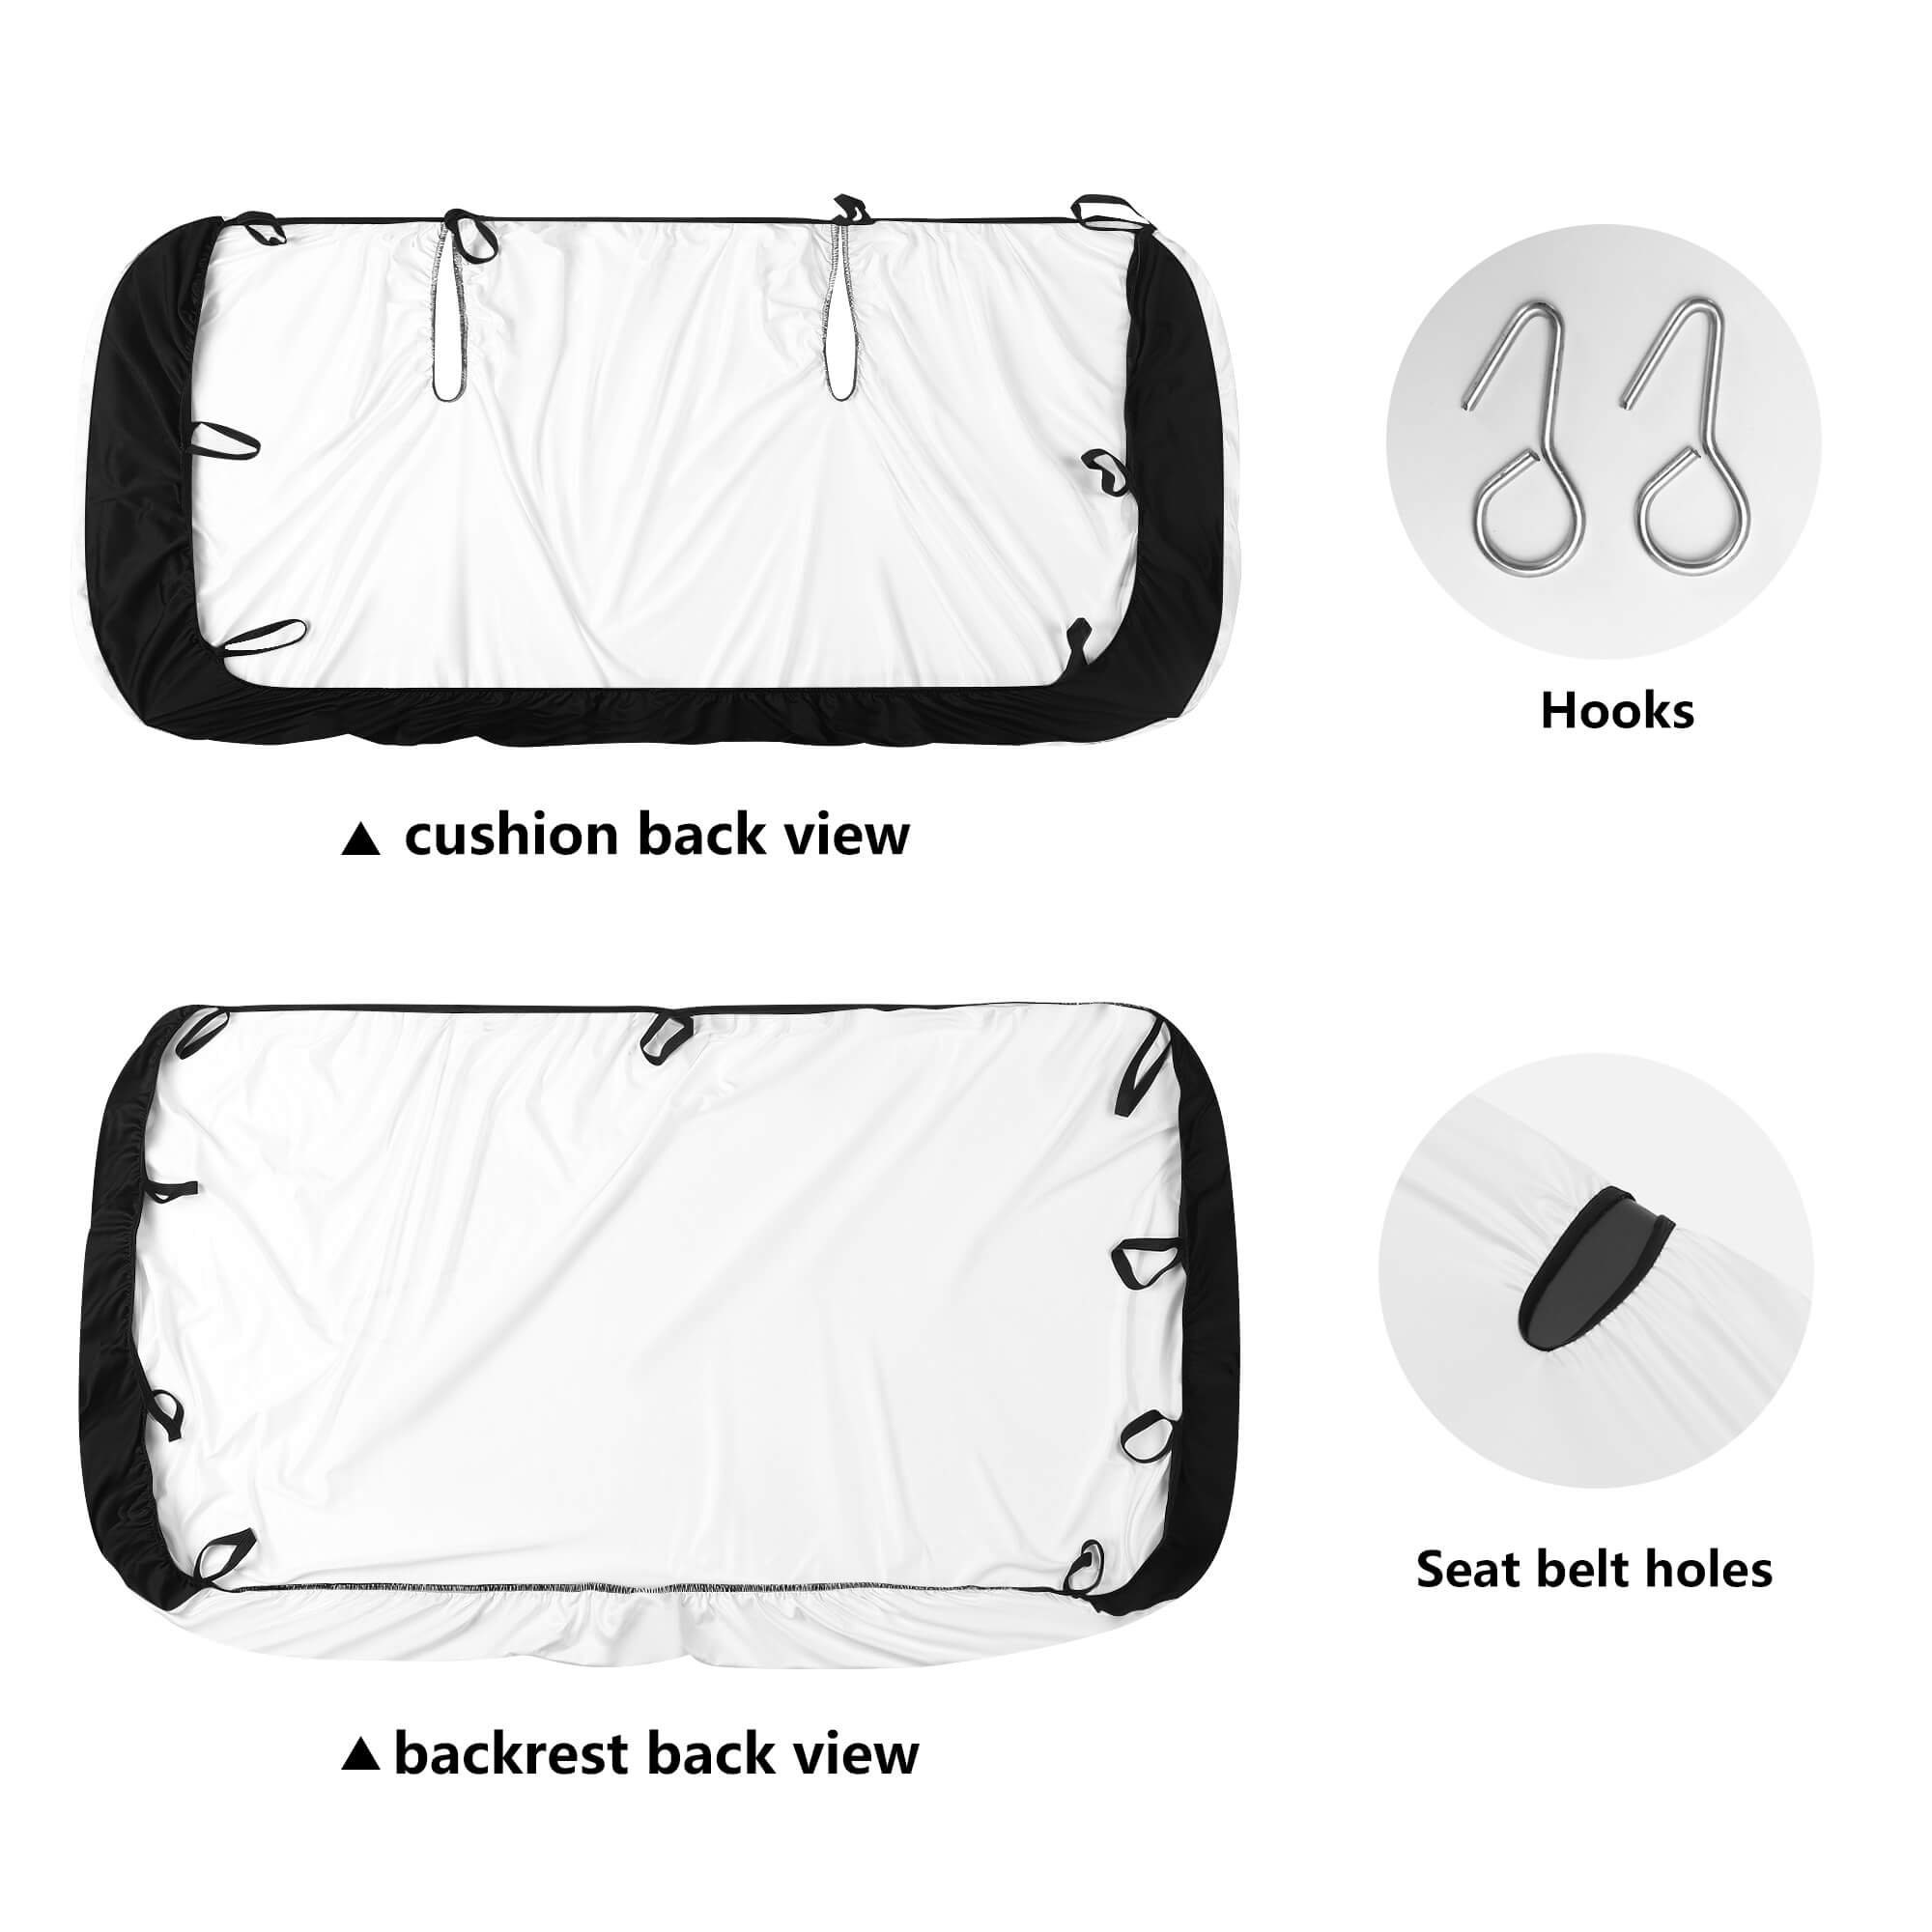 Black And White Wildflowers Car Seat Covers